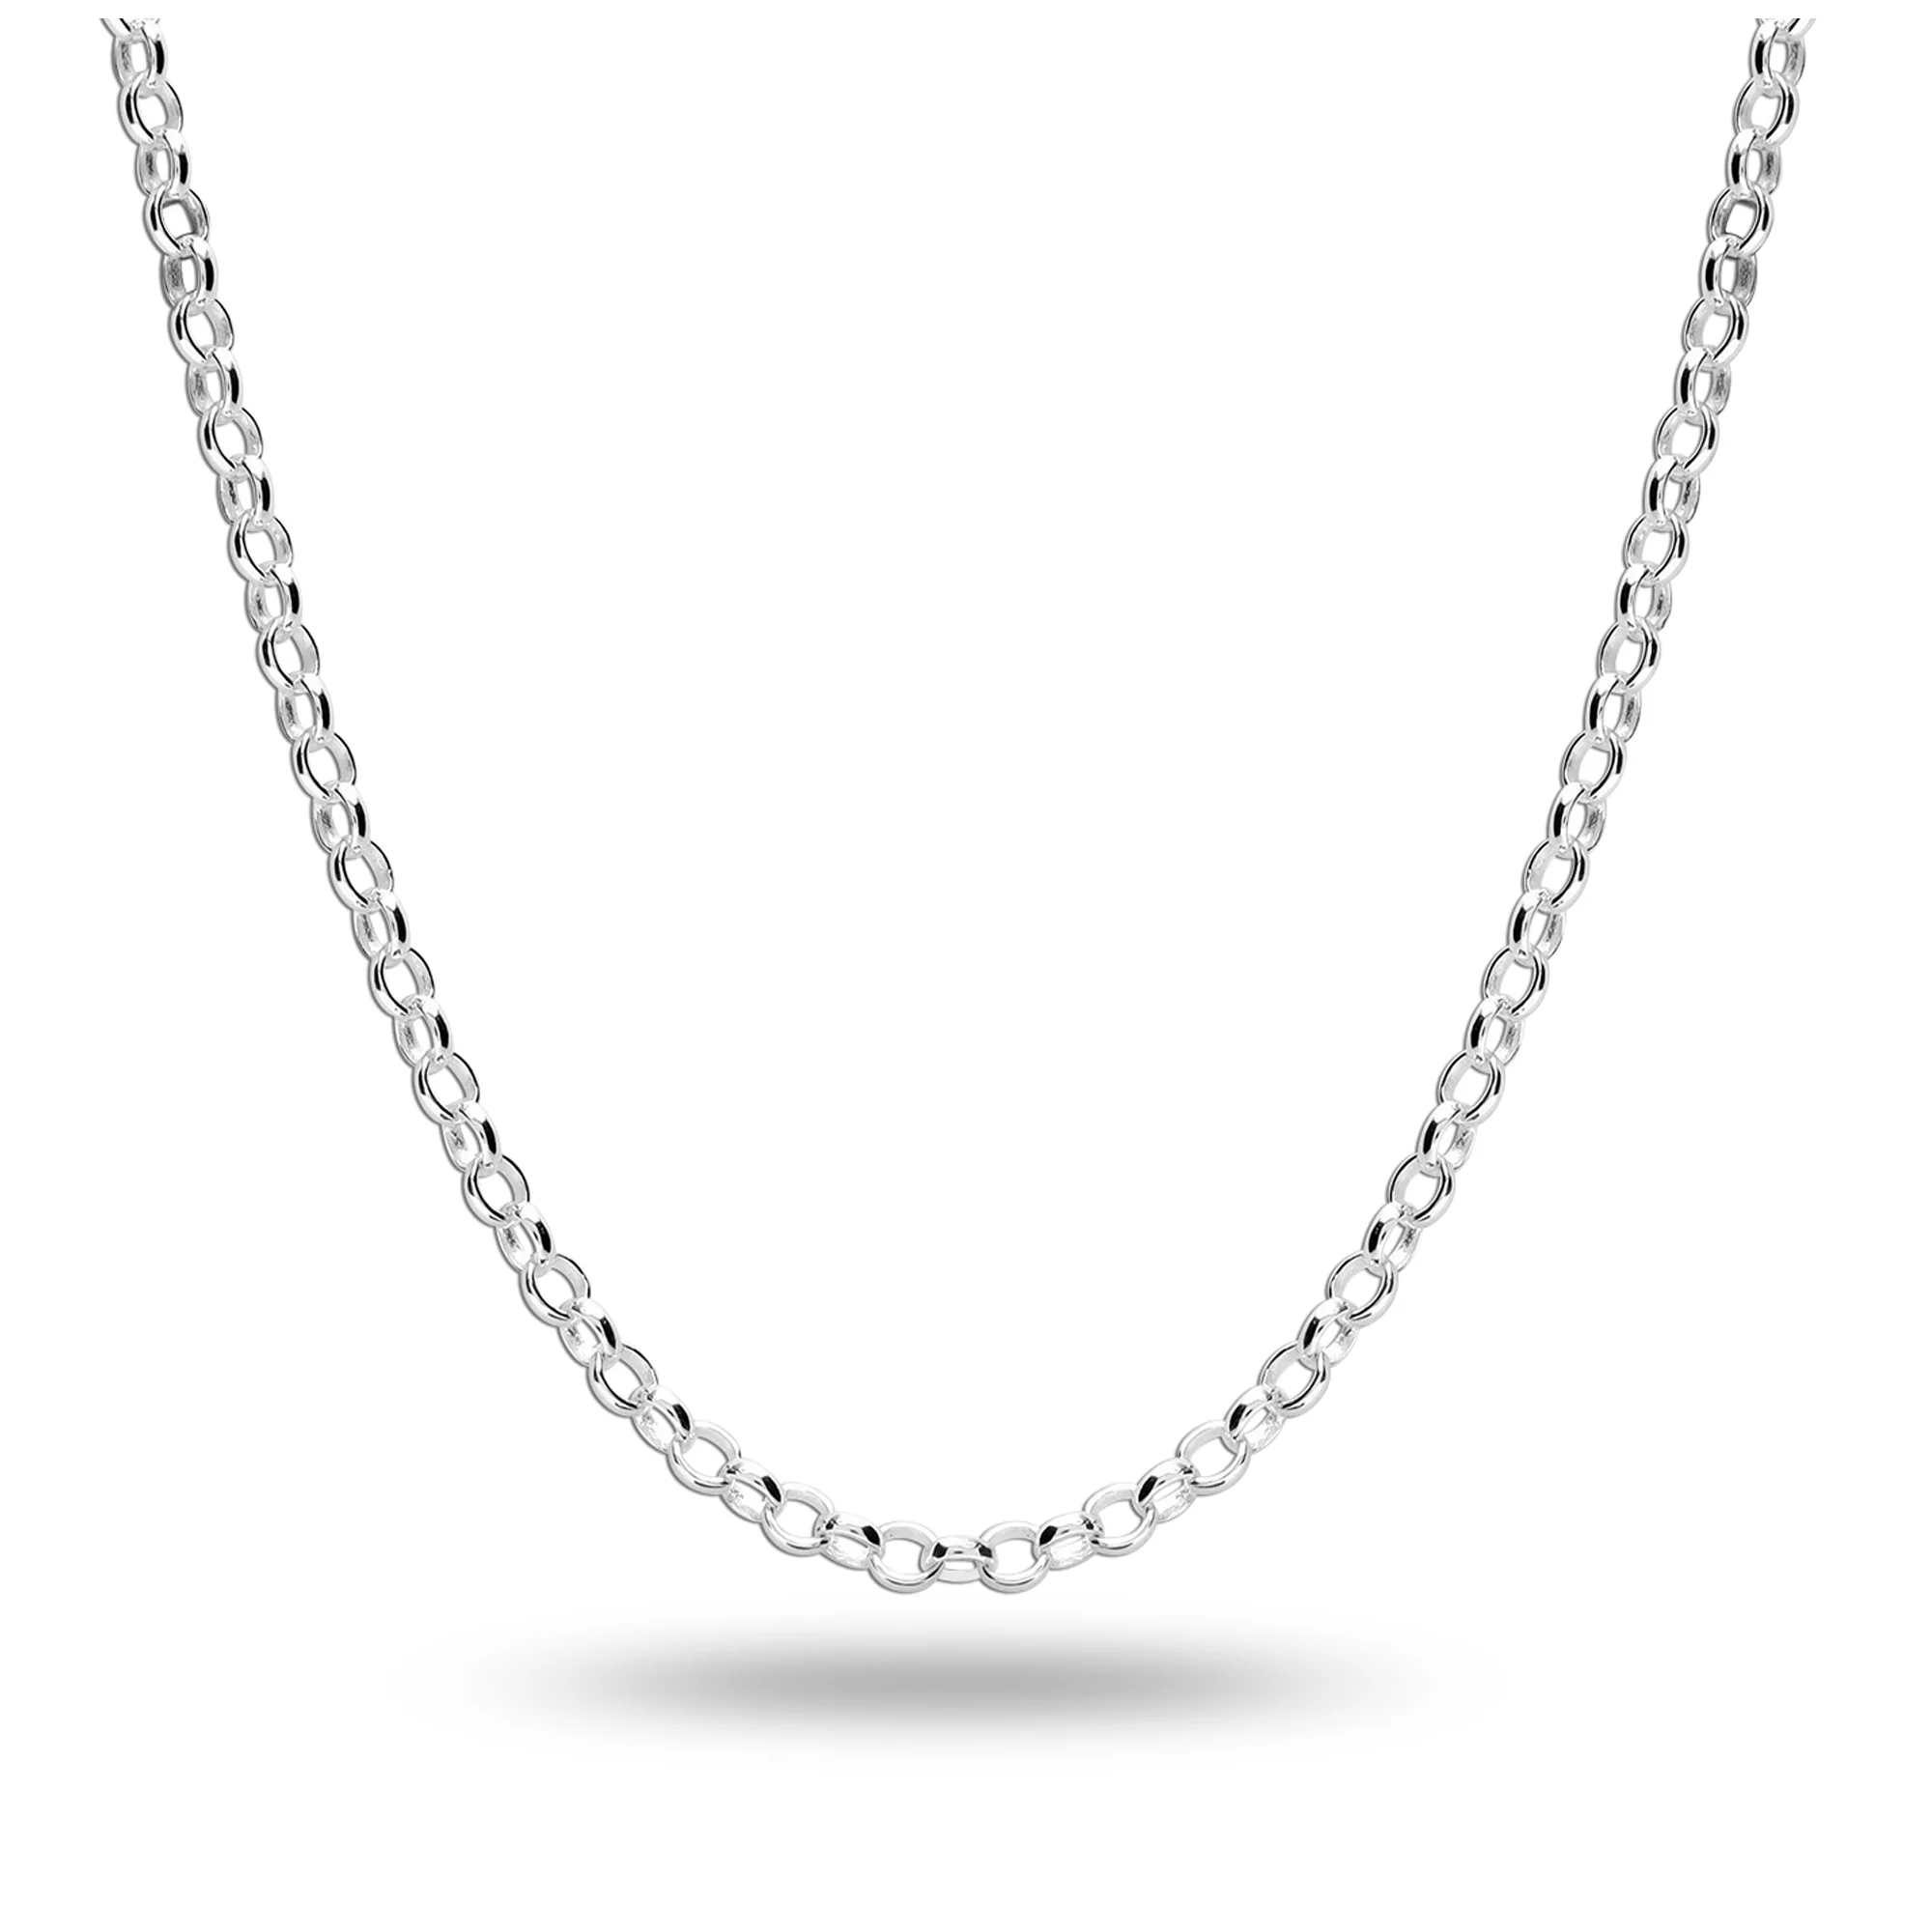 20 INCHES 2MM ROUND ZALI/NETT CHAIN STERLING SILVER 92.5% SILVER  STRONG,DURABLE,THICK CHAIN FOR MENS AND WOMEN'S IN PURE SILVER – Jain Silver